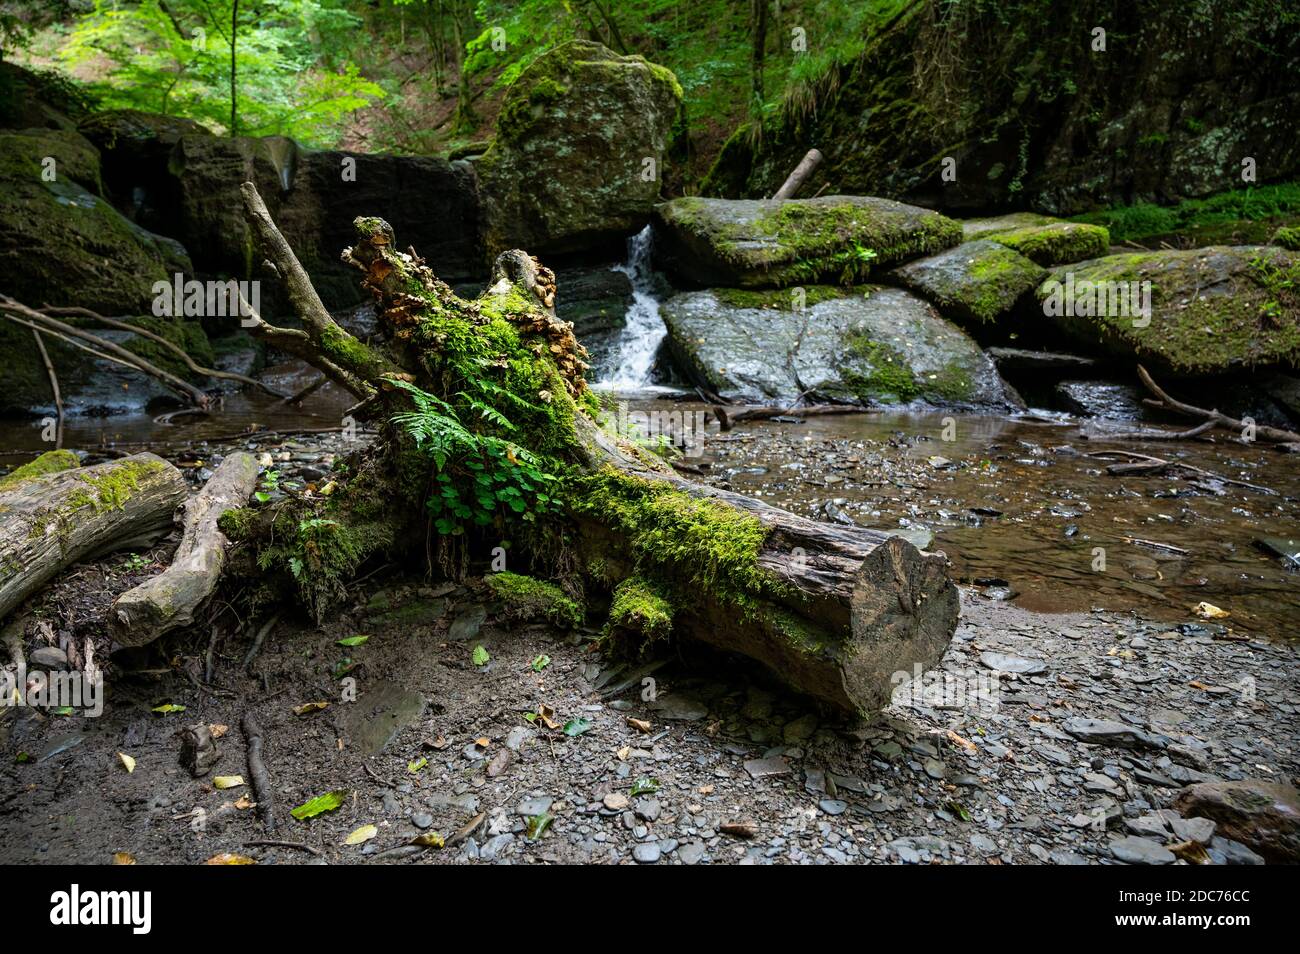 ferns and mushrooms grow on an old tree stump that lies in a riverbed, nature takes it all back Stock Photo